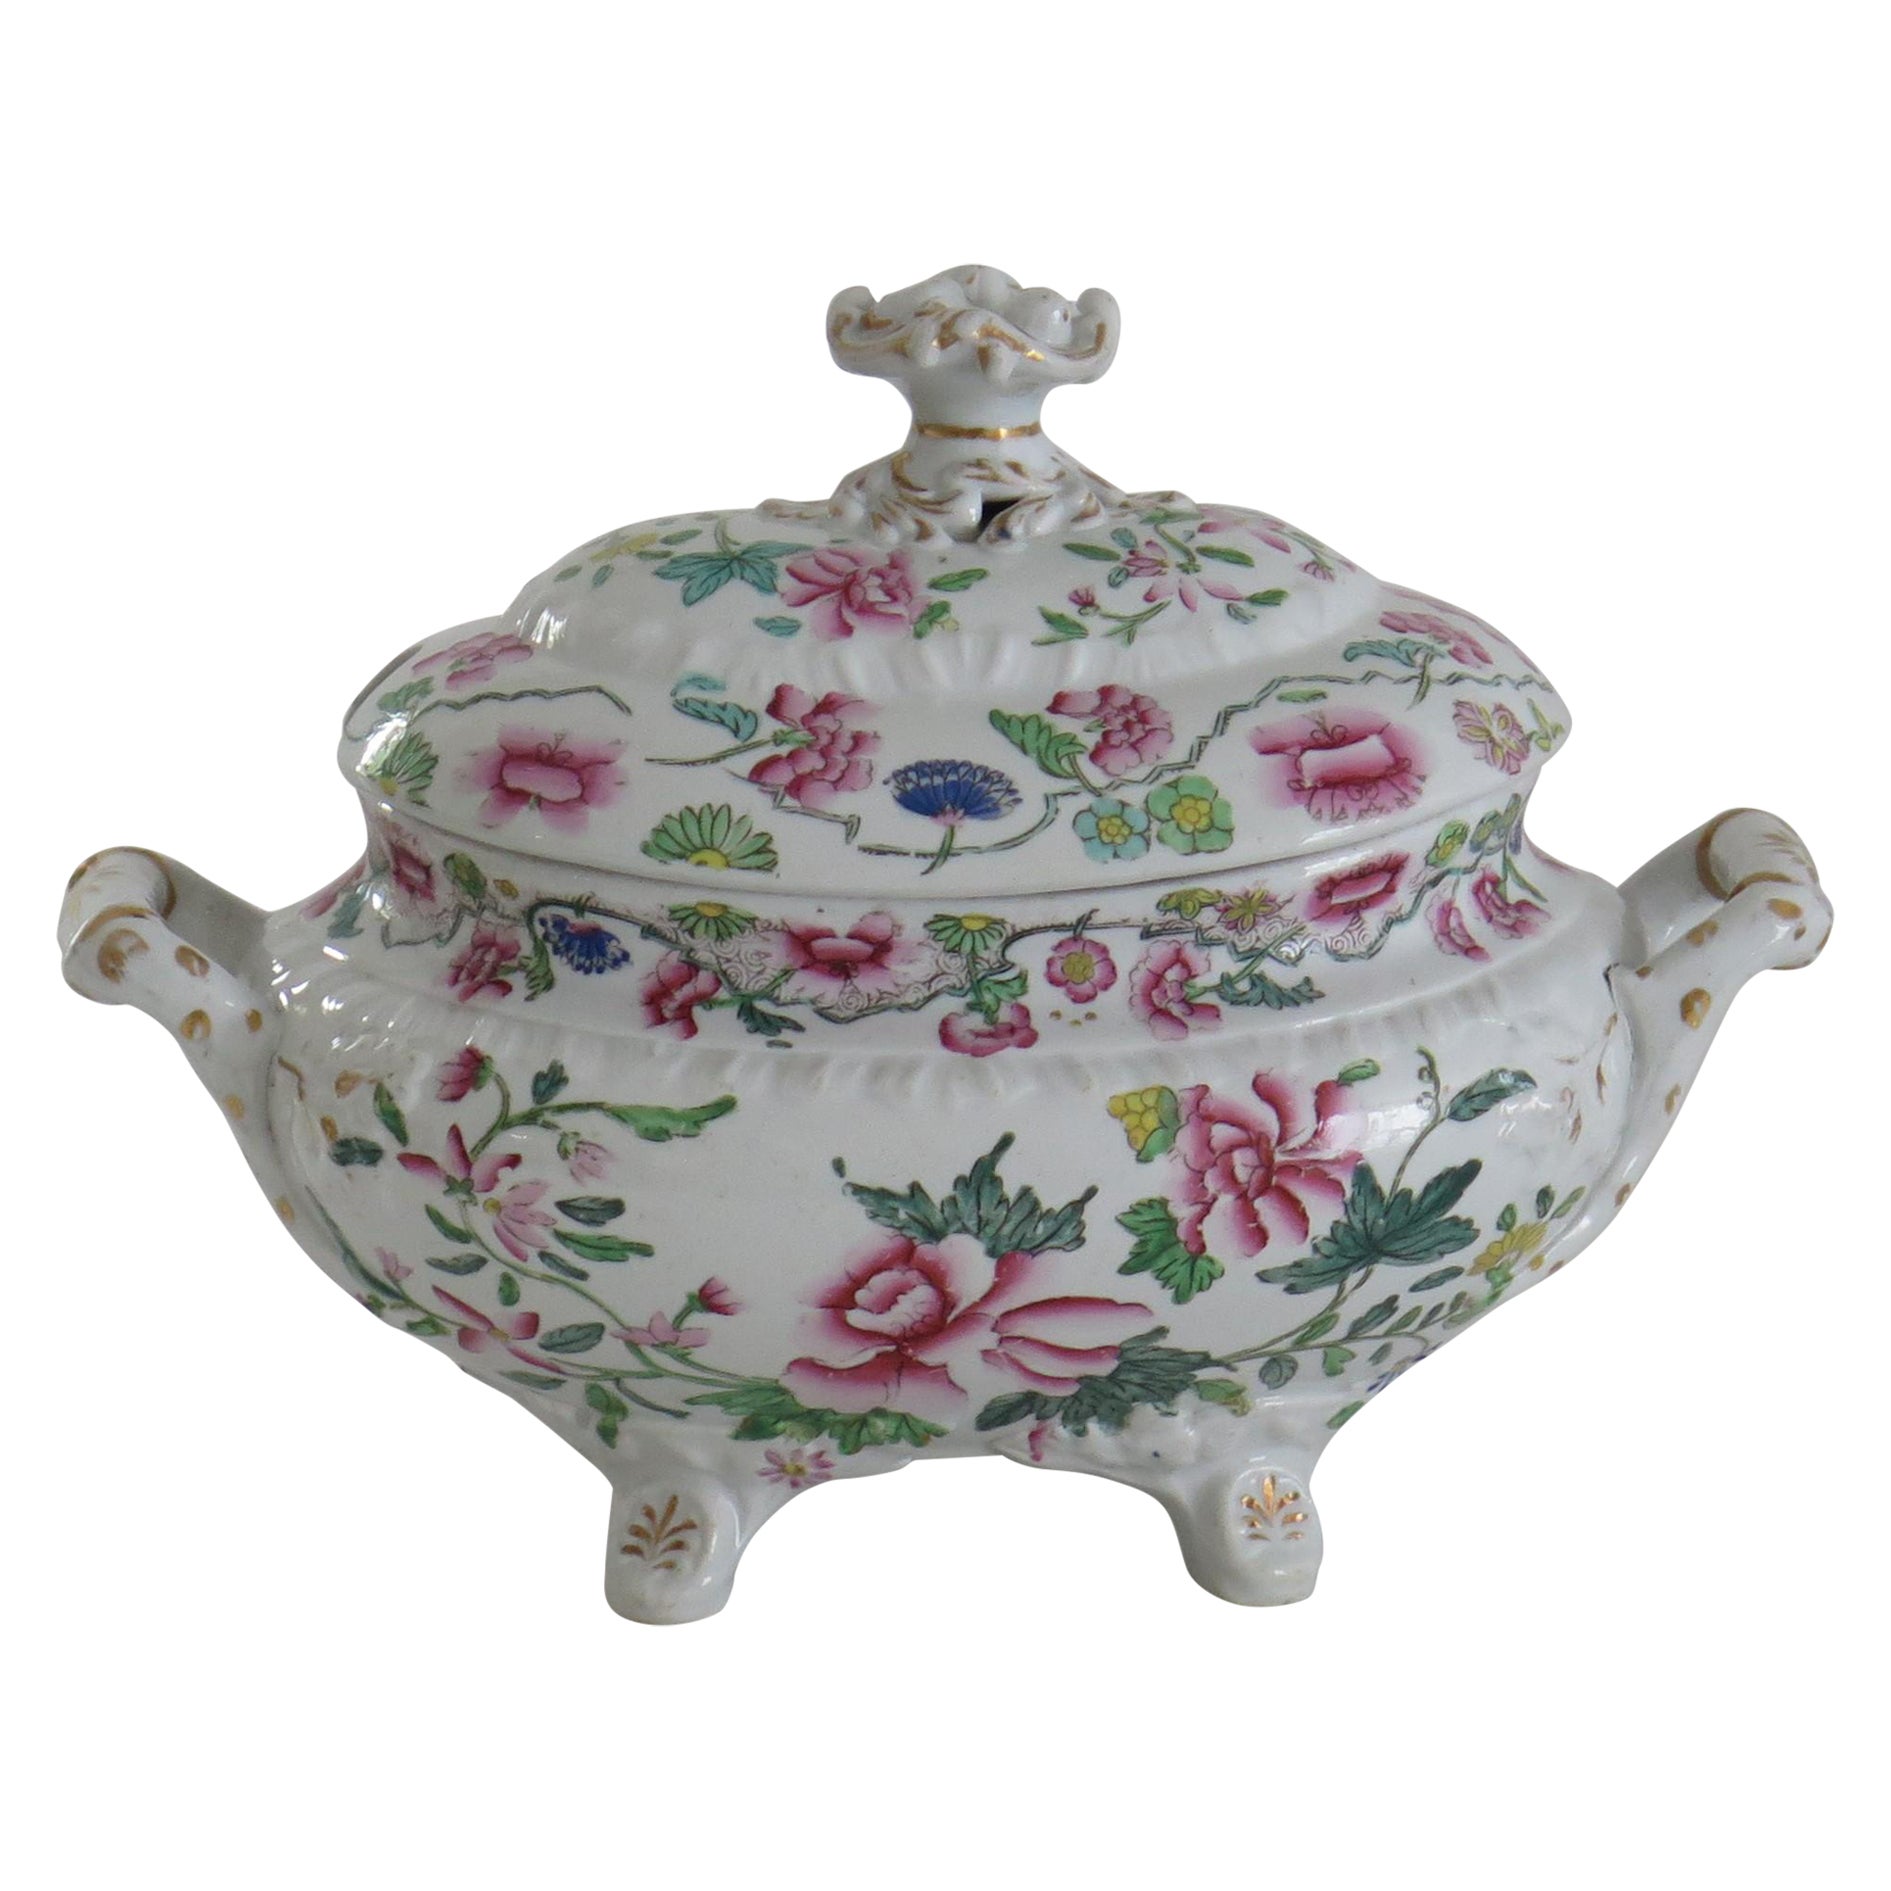 Georgian Hicks and Meigh Ironstone Sauce Tureen Floral Pattern No.8, Circa 1815 For Sale